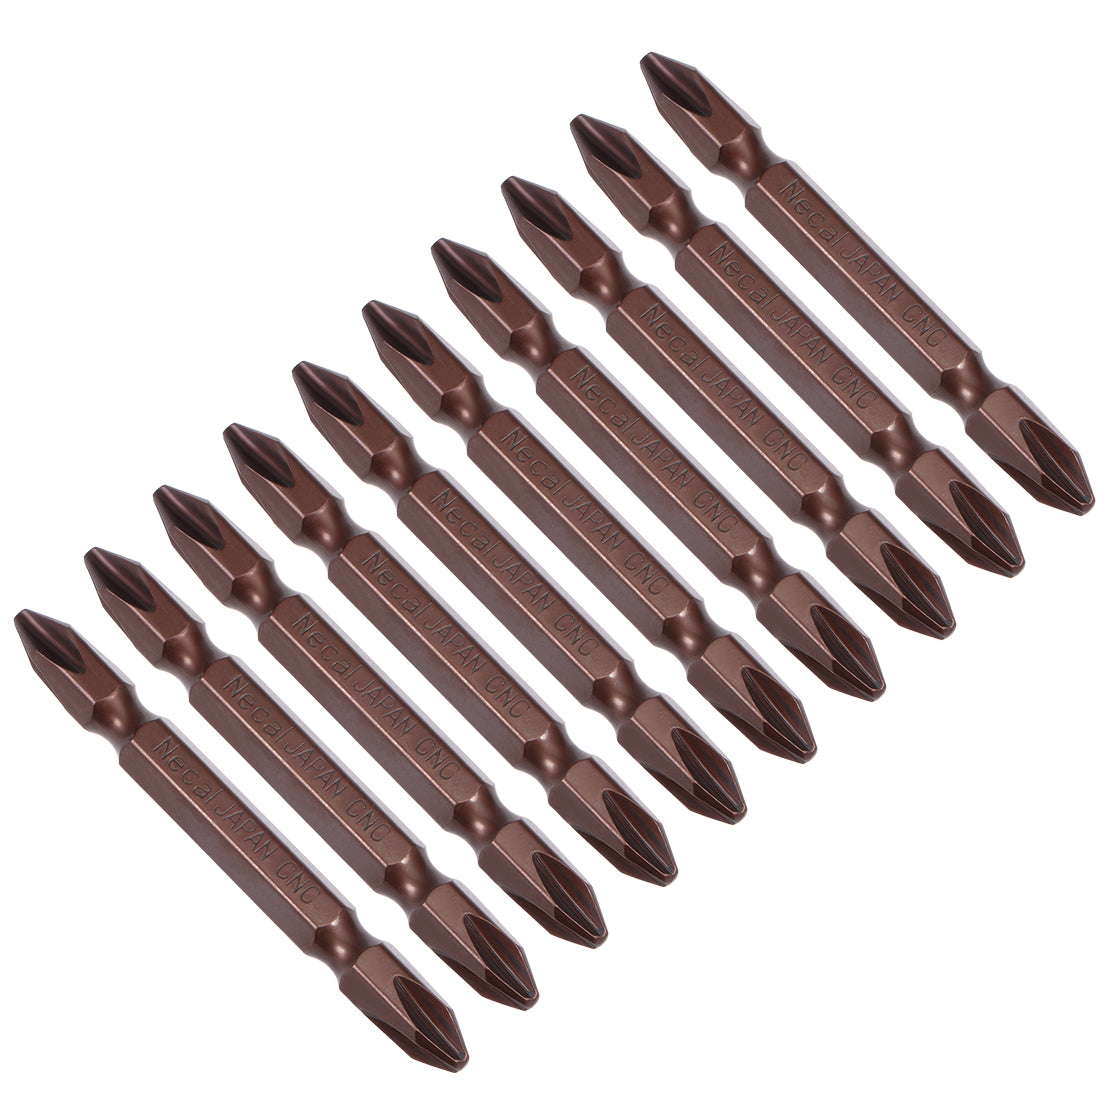 Uxcell Uxcell 10 pcs 65mm 1/4" Hex Shank PH2 Magnetic Phillips Double-Ended Screwdriver Bit S2